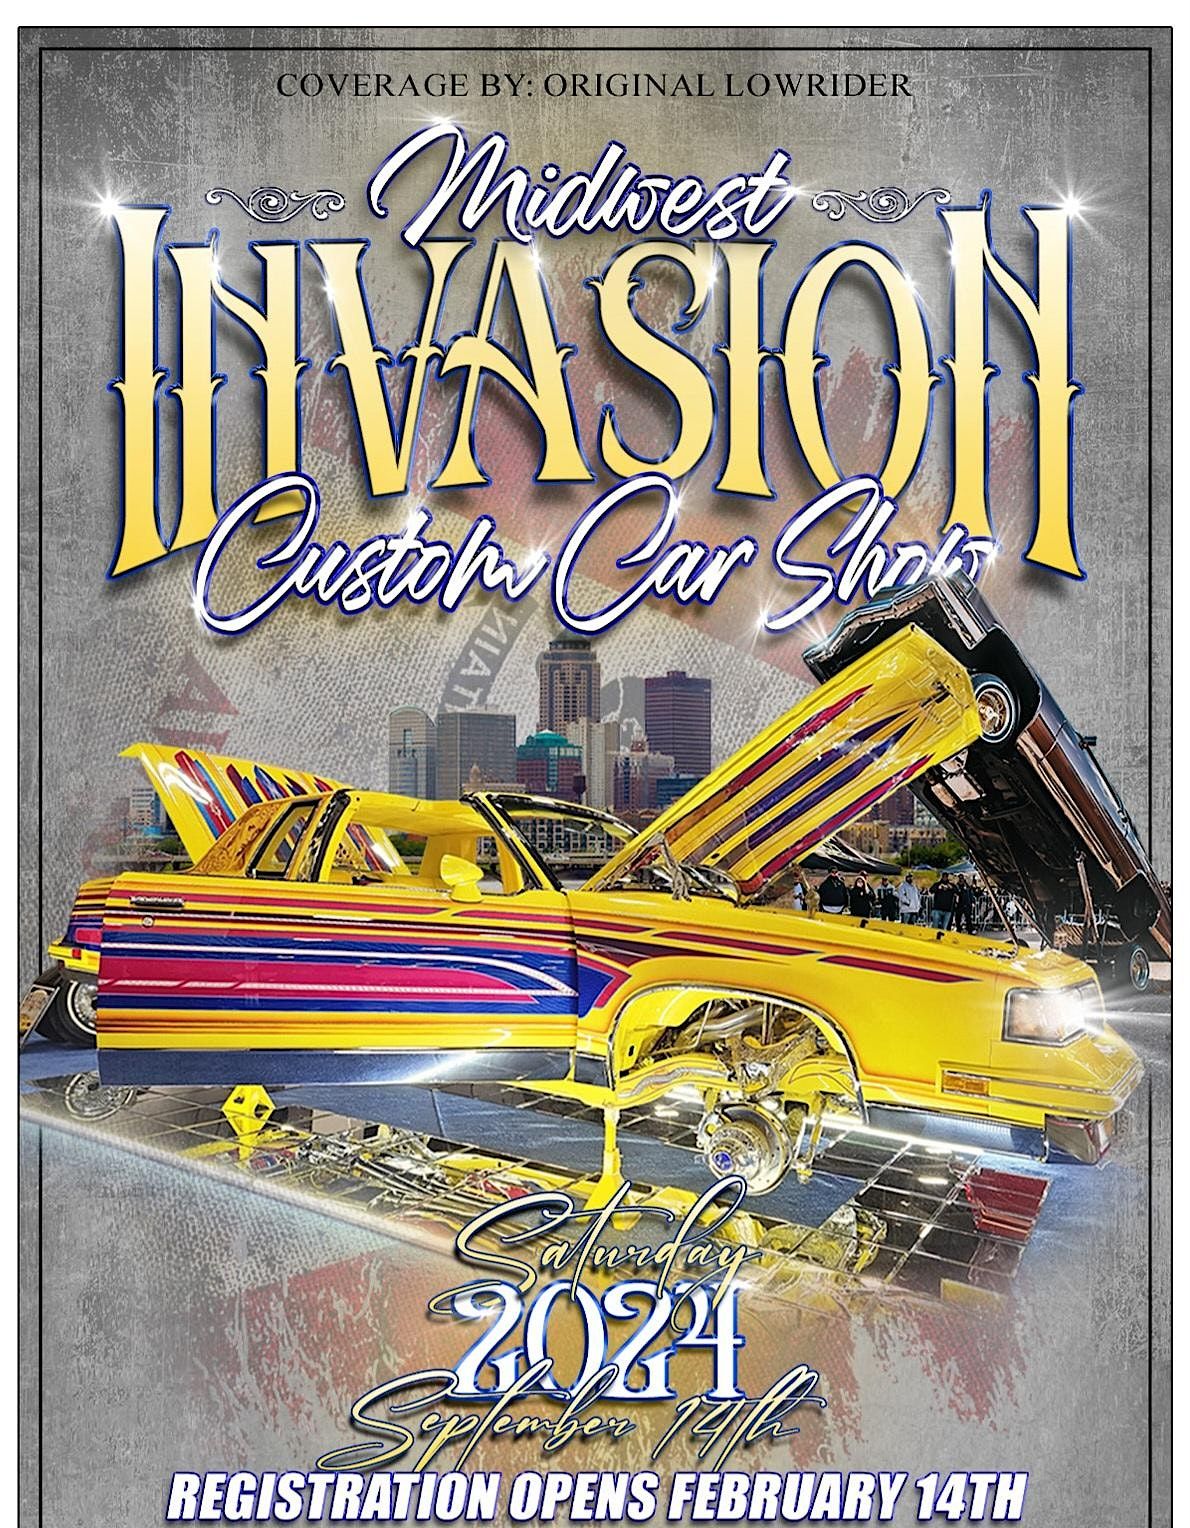 Midwest invasion custom carshow